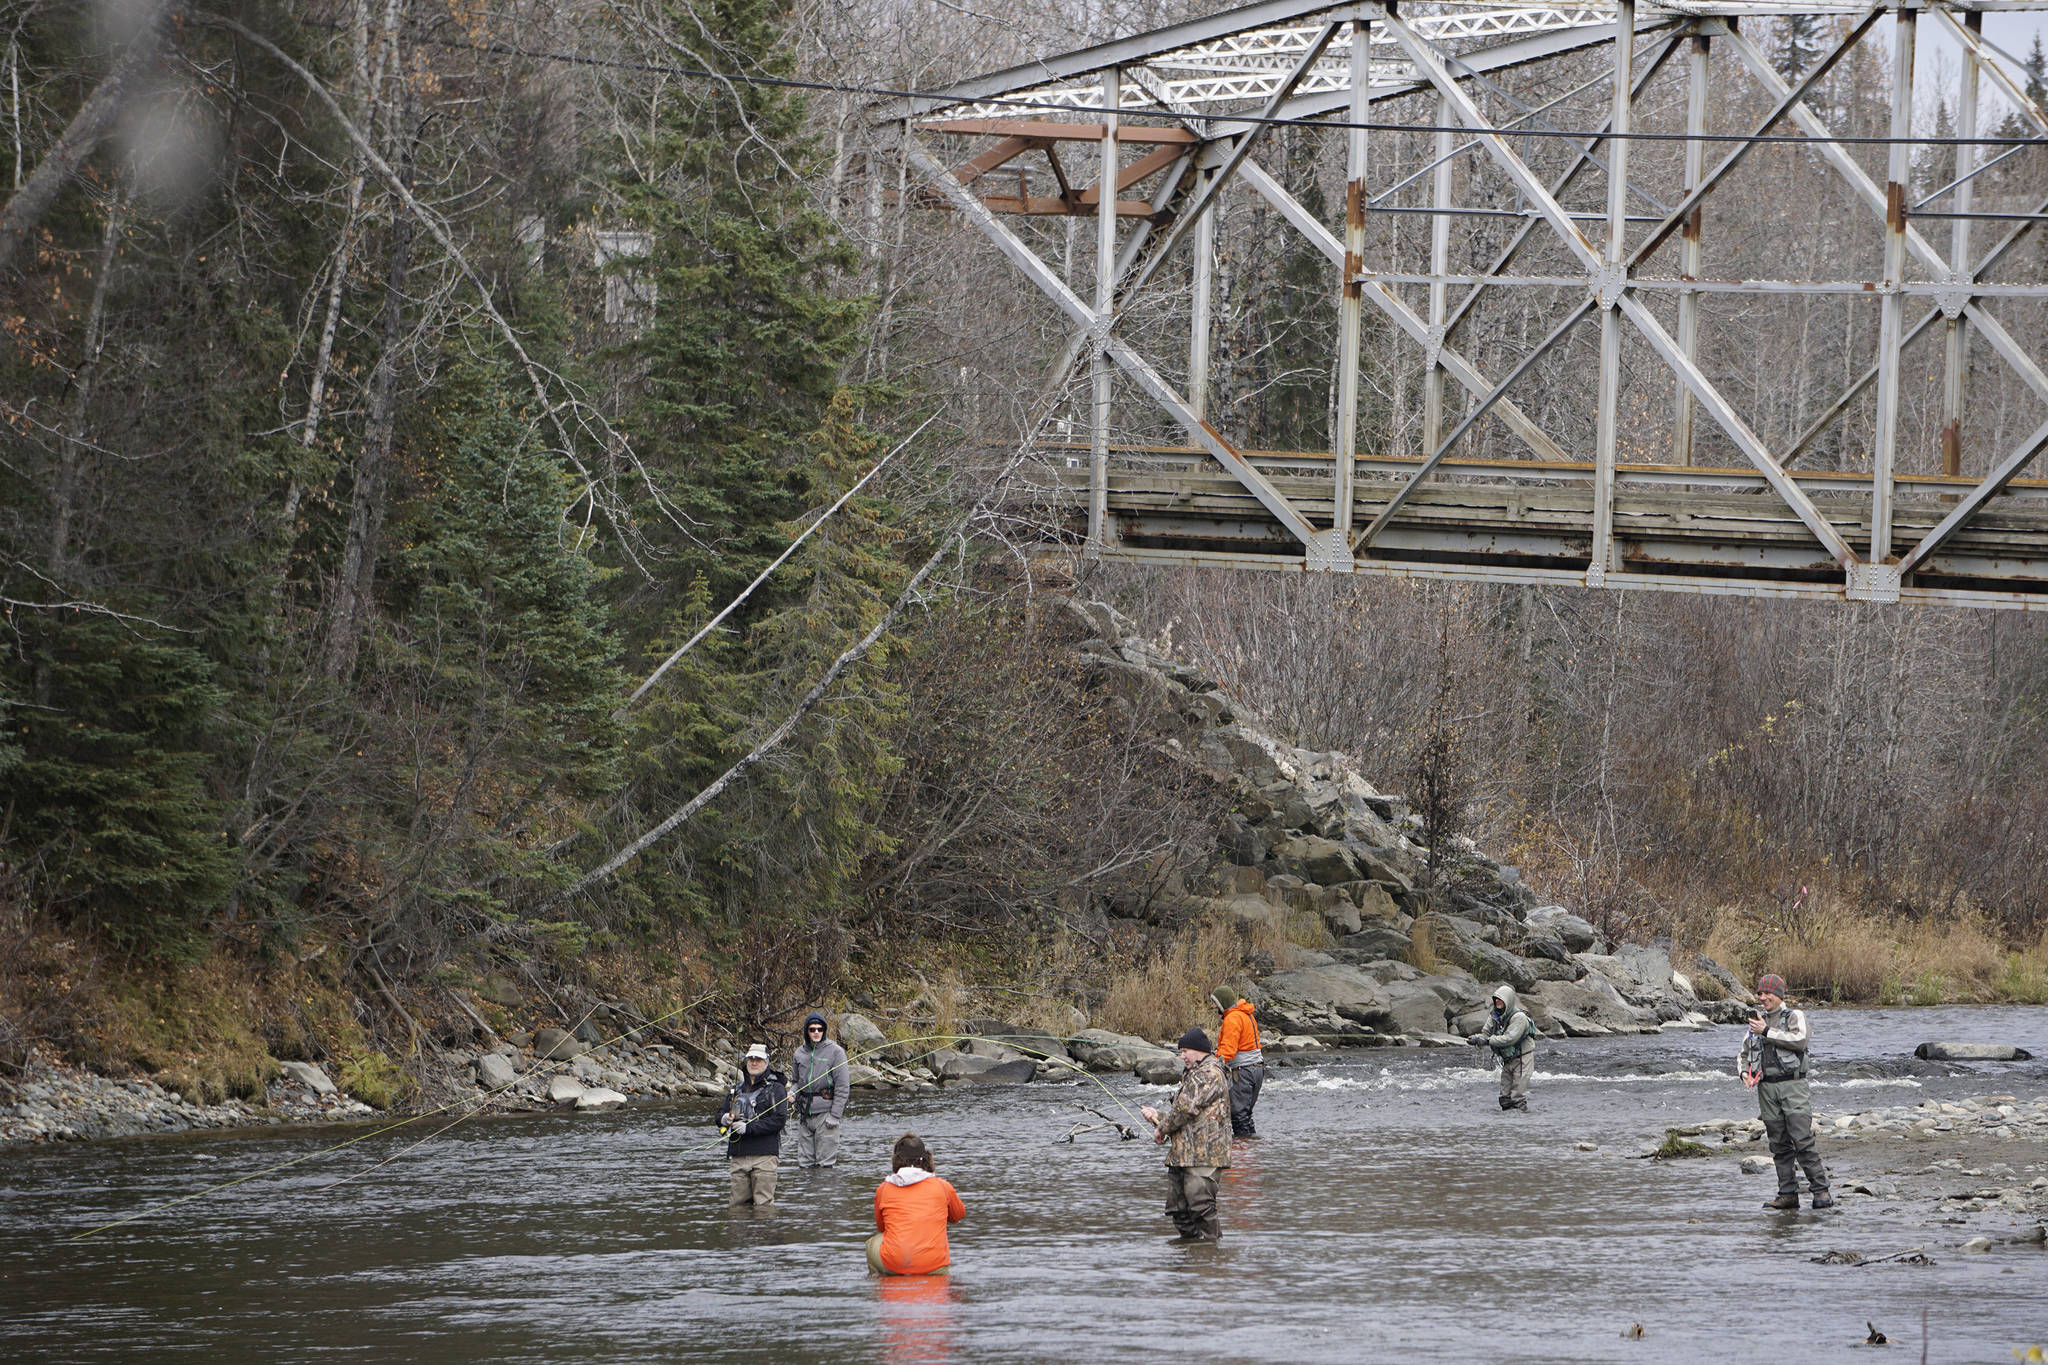 Anglers fish for steelhead in the Anchor River by the Anchor River Bridge on Saturday, Oct. 17, 2020, in Anchor Point, Alaska. (Photo by Michael Armstrong/Homer News)